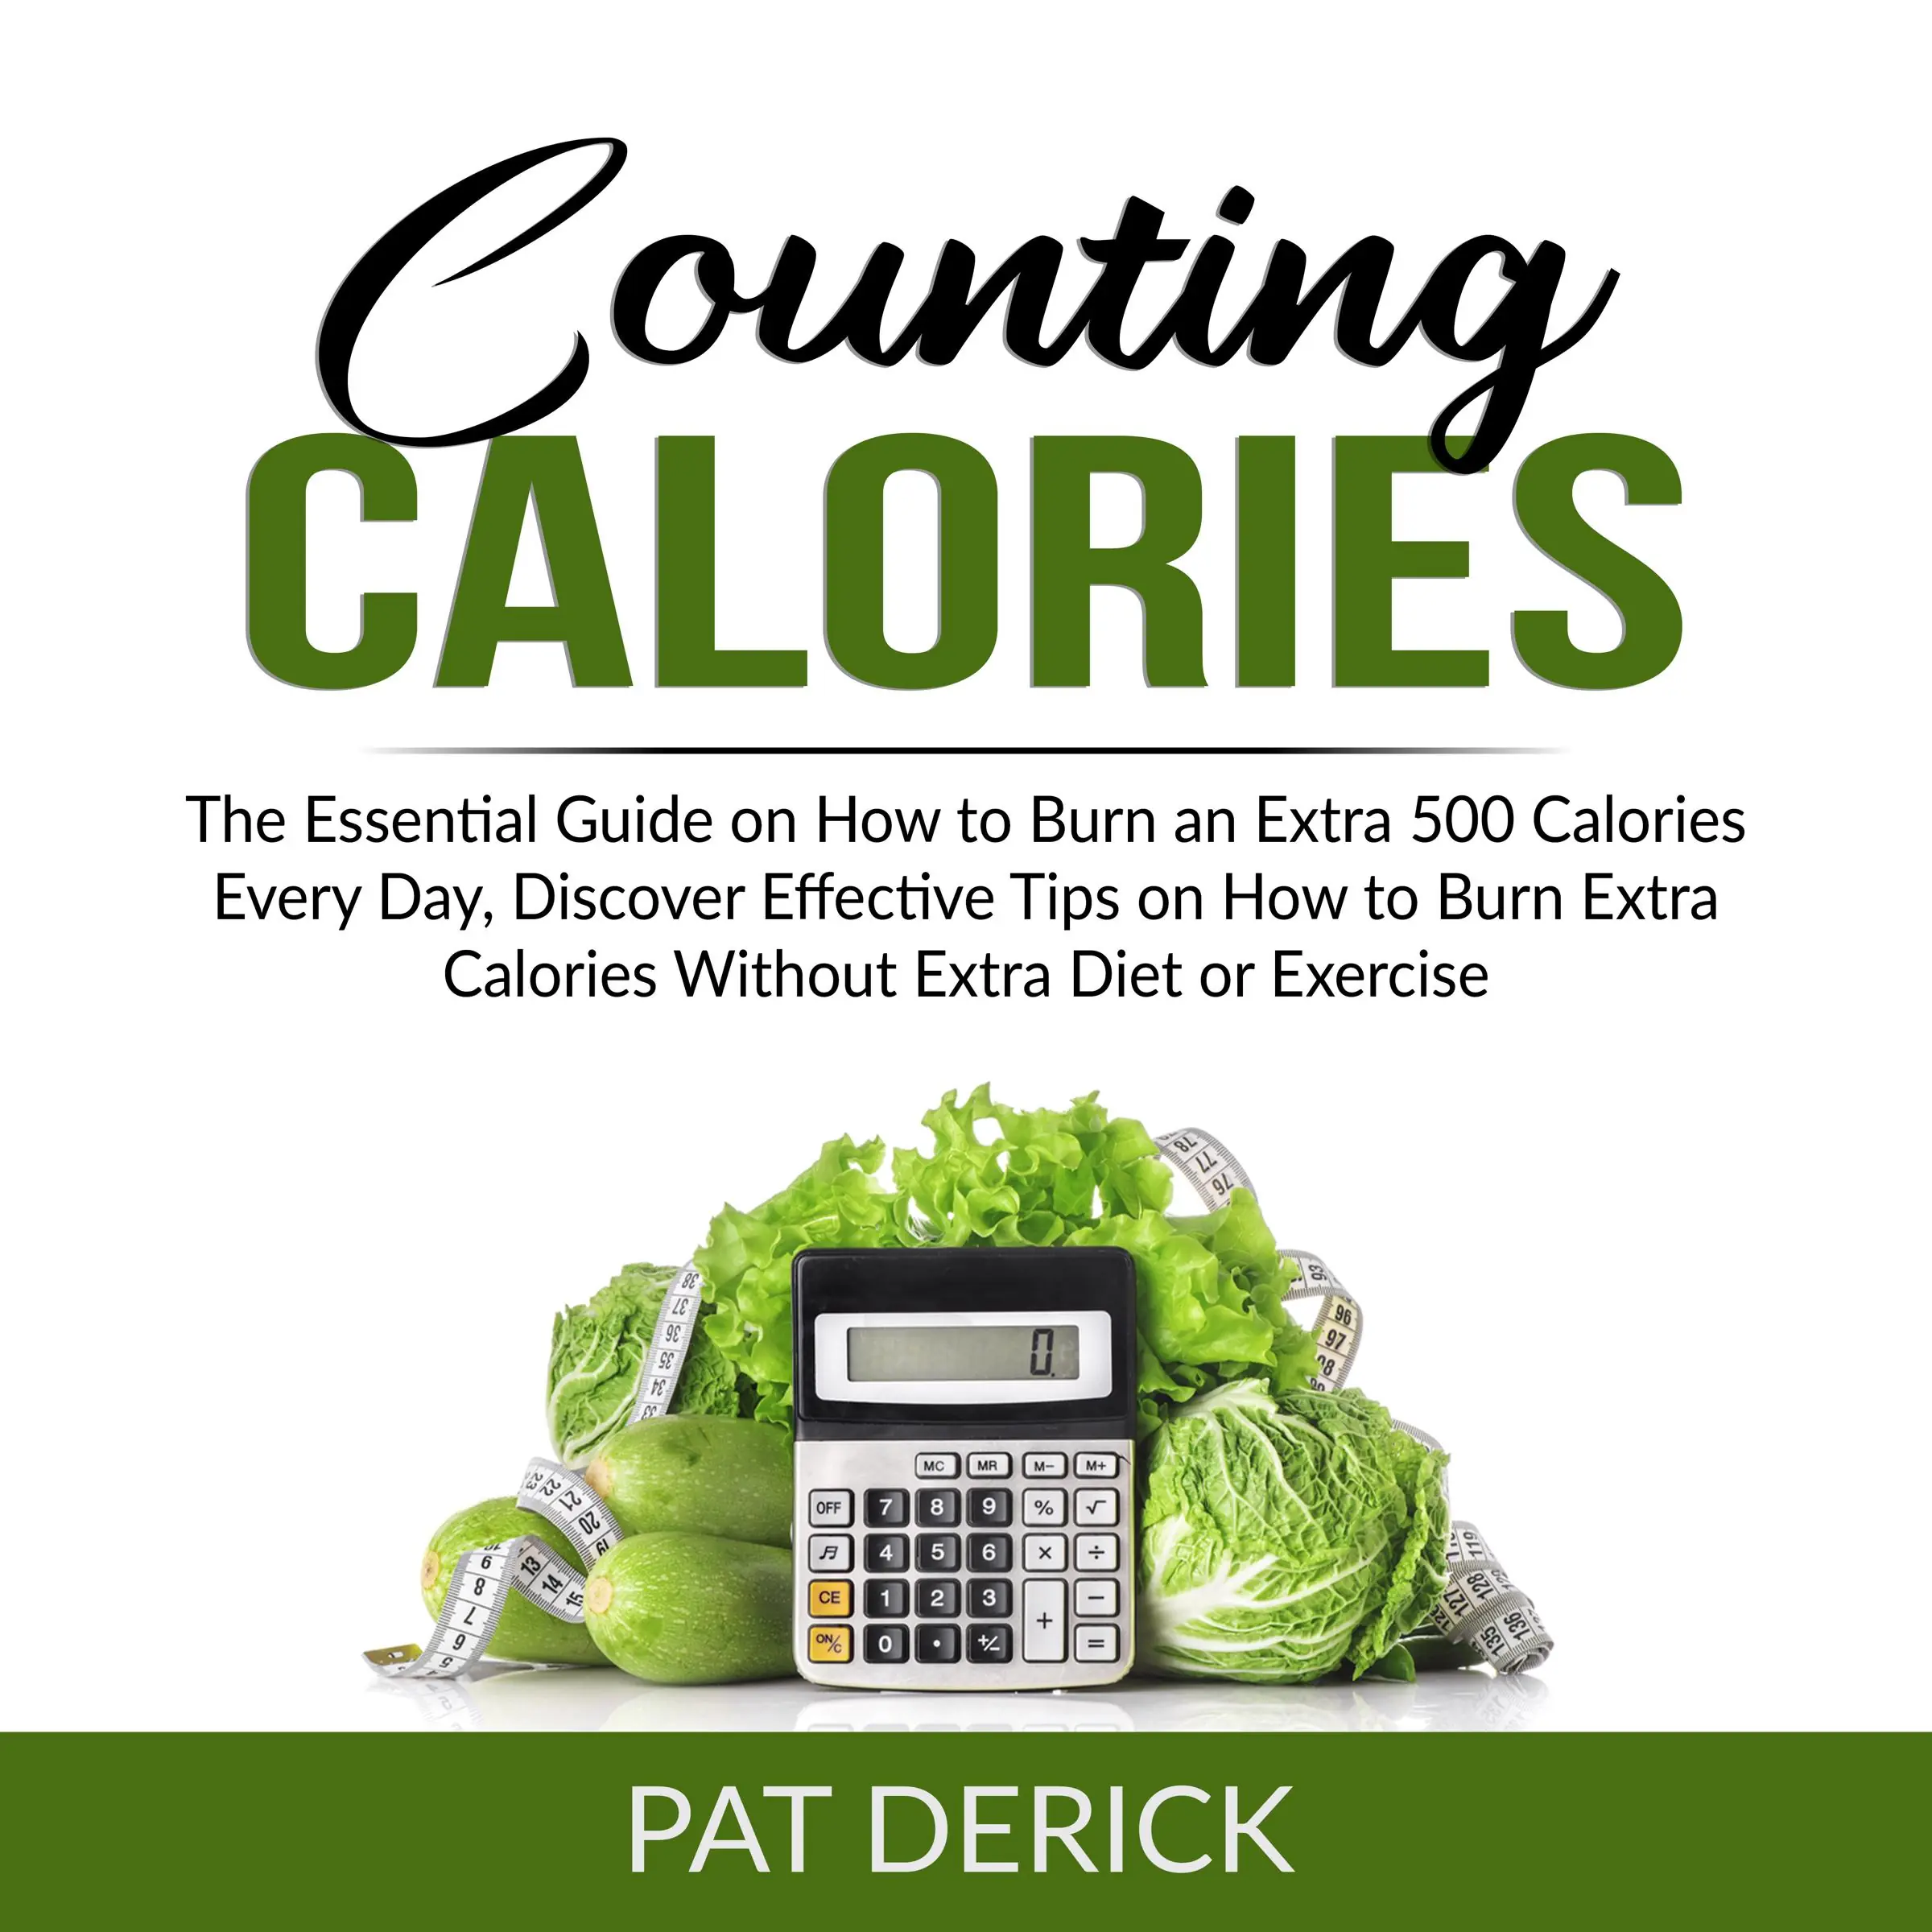 Counting Calories: The Essential Guide on How to Burn an Extra 500 Calories Every Day, Discover Effective Tips on How to Burn Extra Calories Without Extra Diet or Exercise Audiobook by Pat Derick